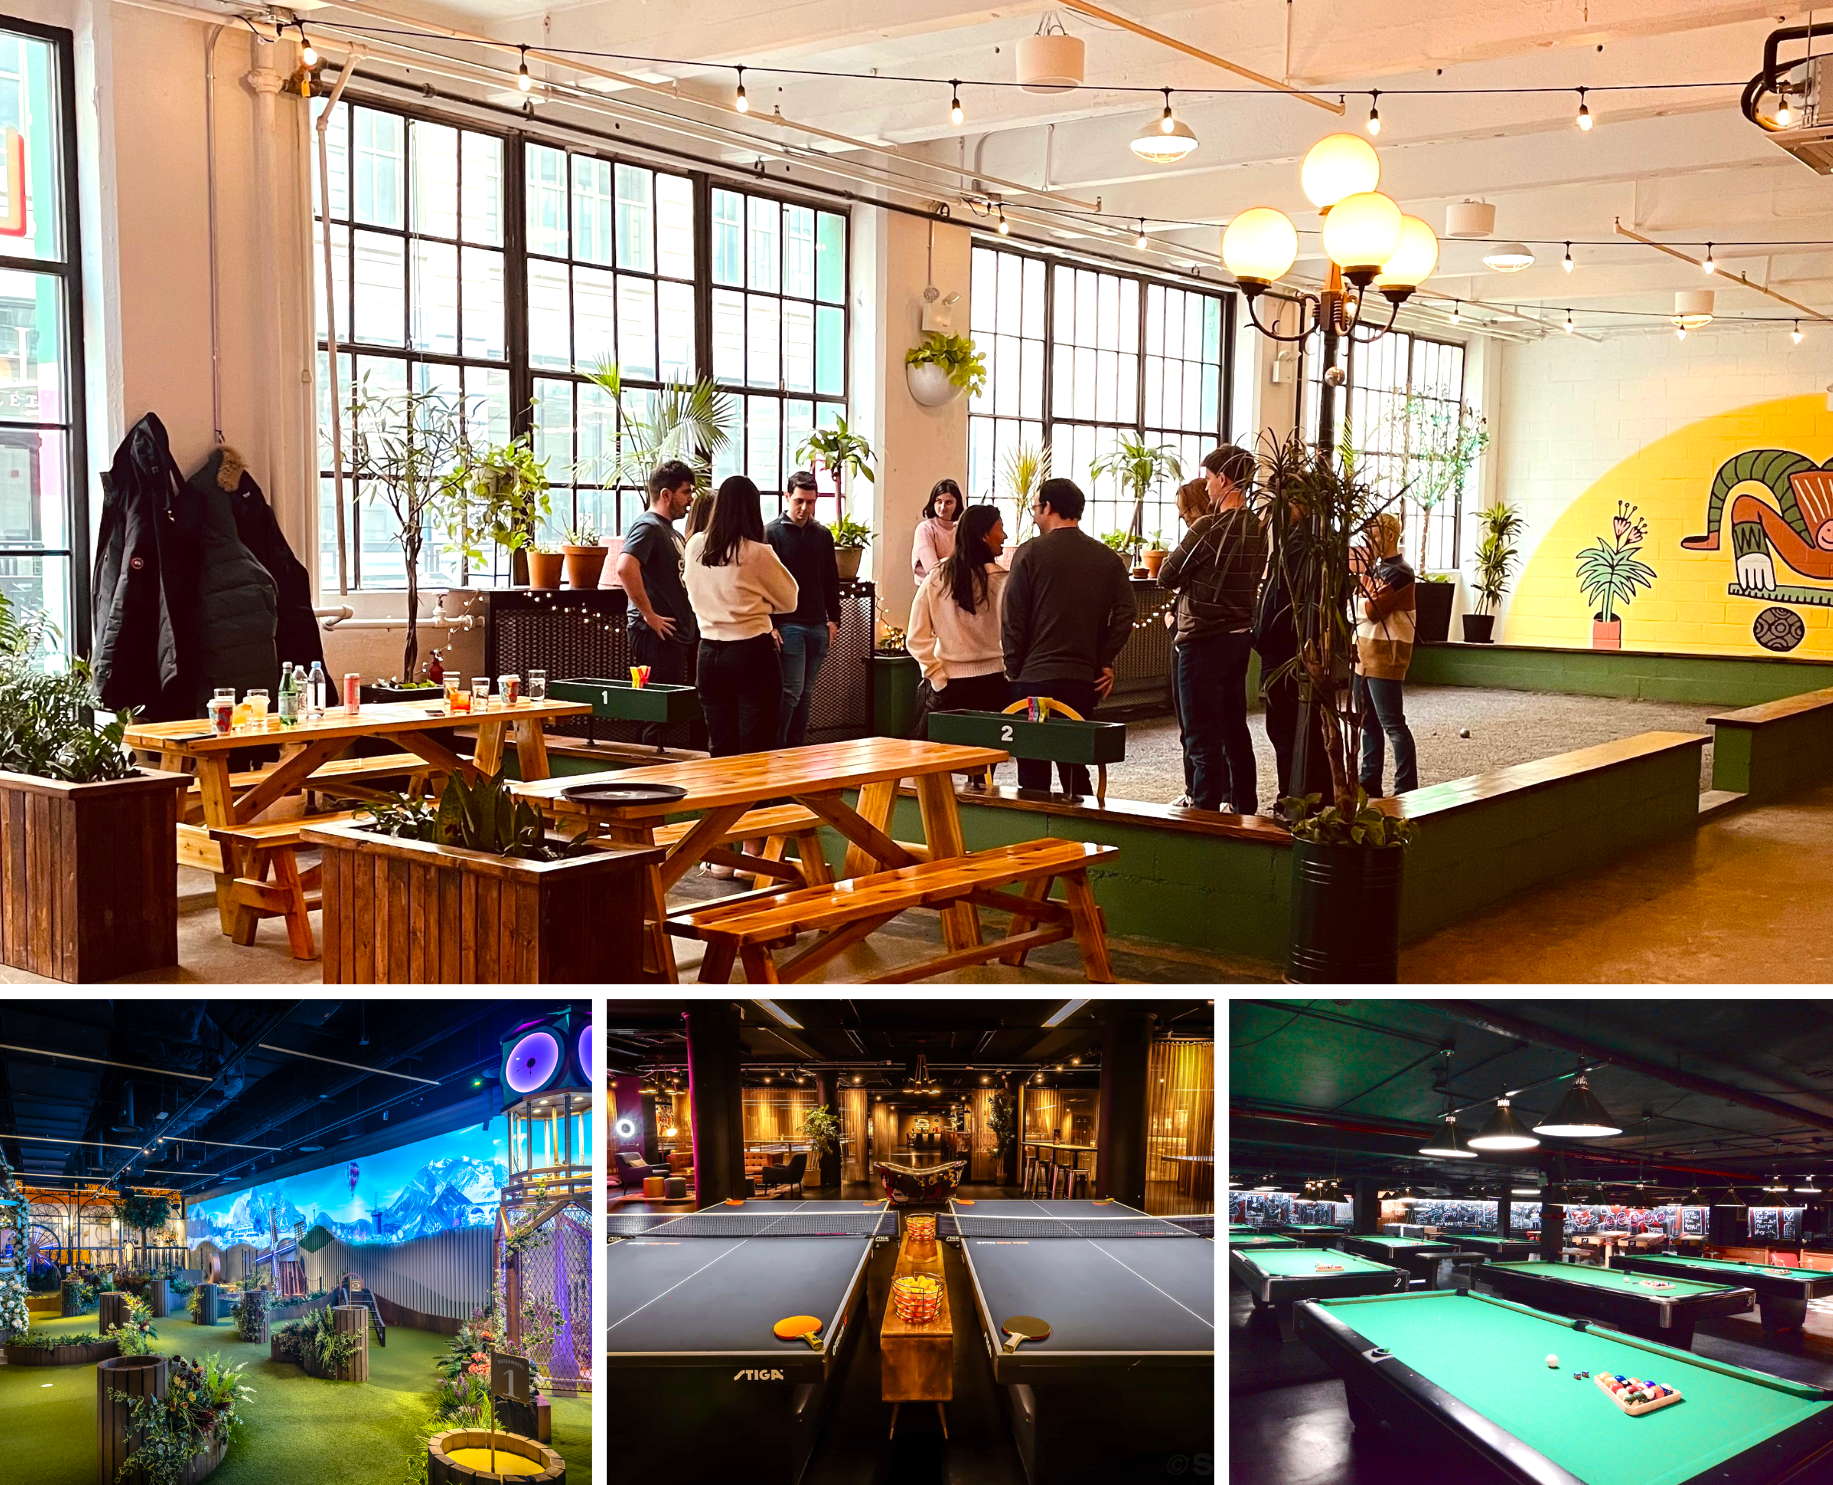 15 fun spots for games and grub in NYC 6sqft